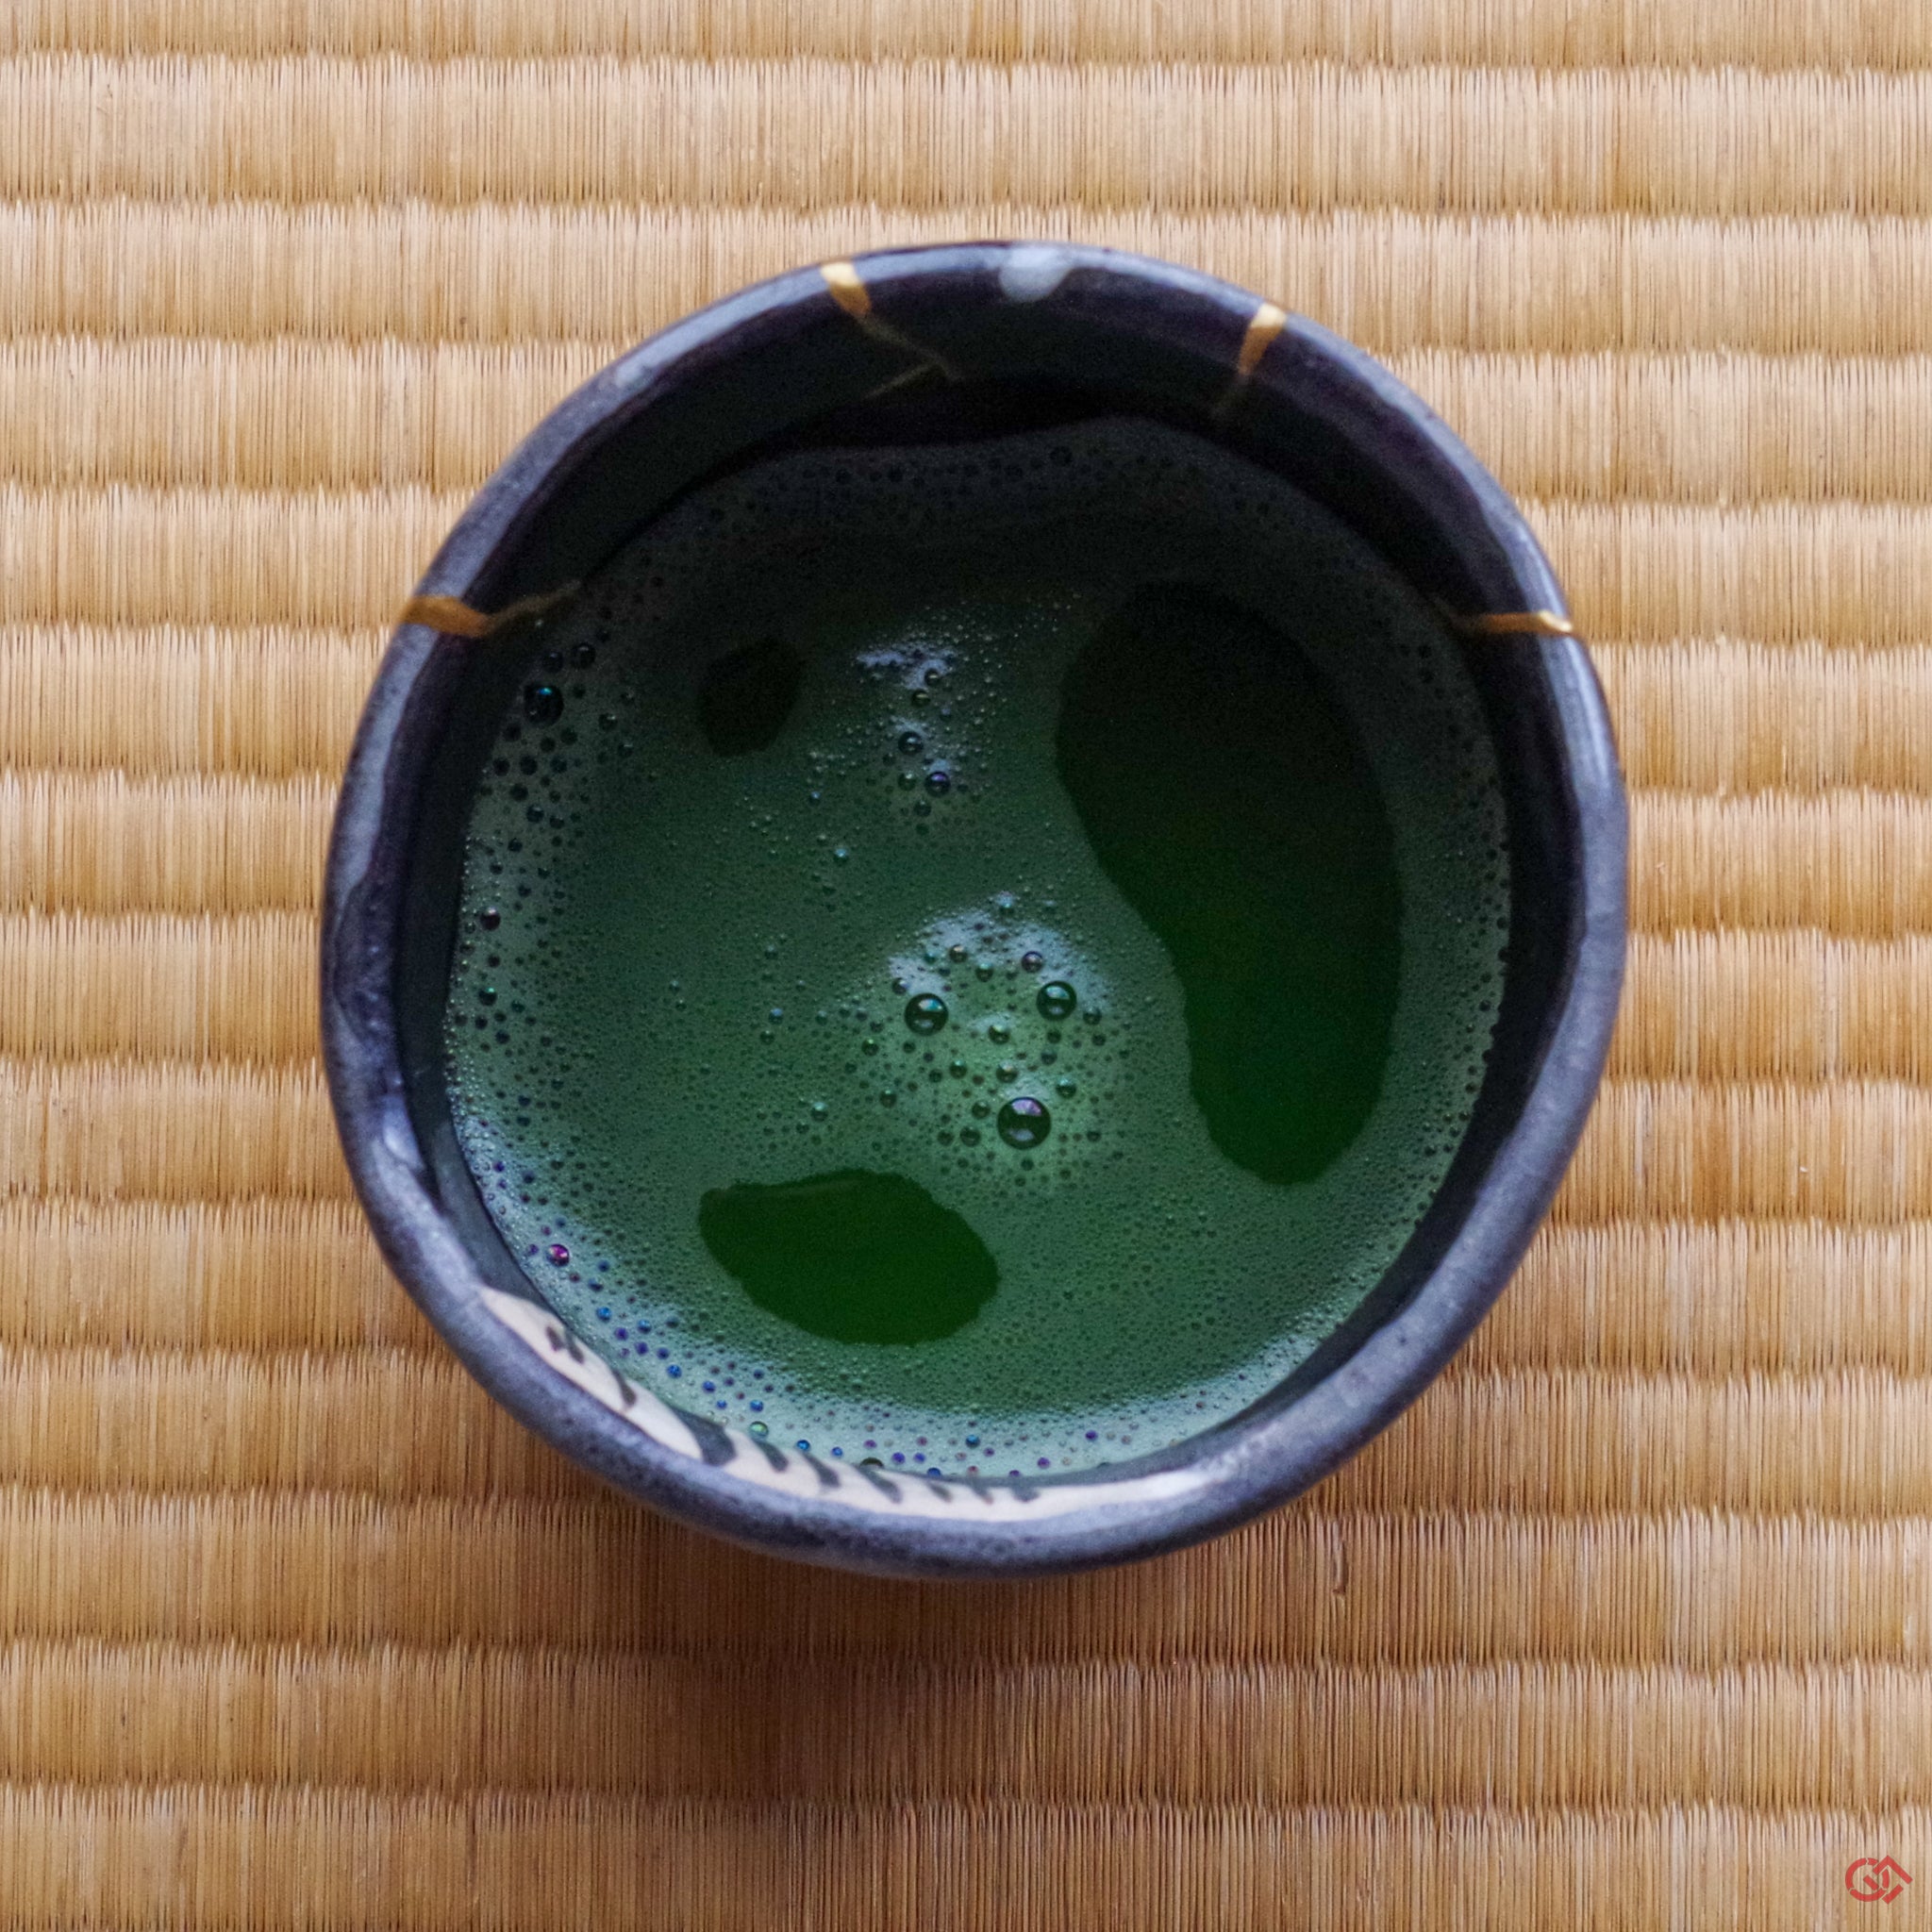 A photo of an authentic Kintsugi pottery piece being used in a real-world setting, such as a cup of matcha being poured into a Kintsugi teabowl.